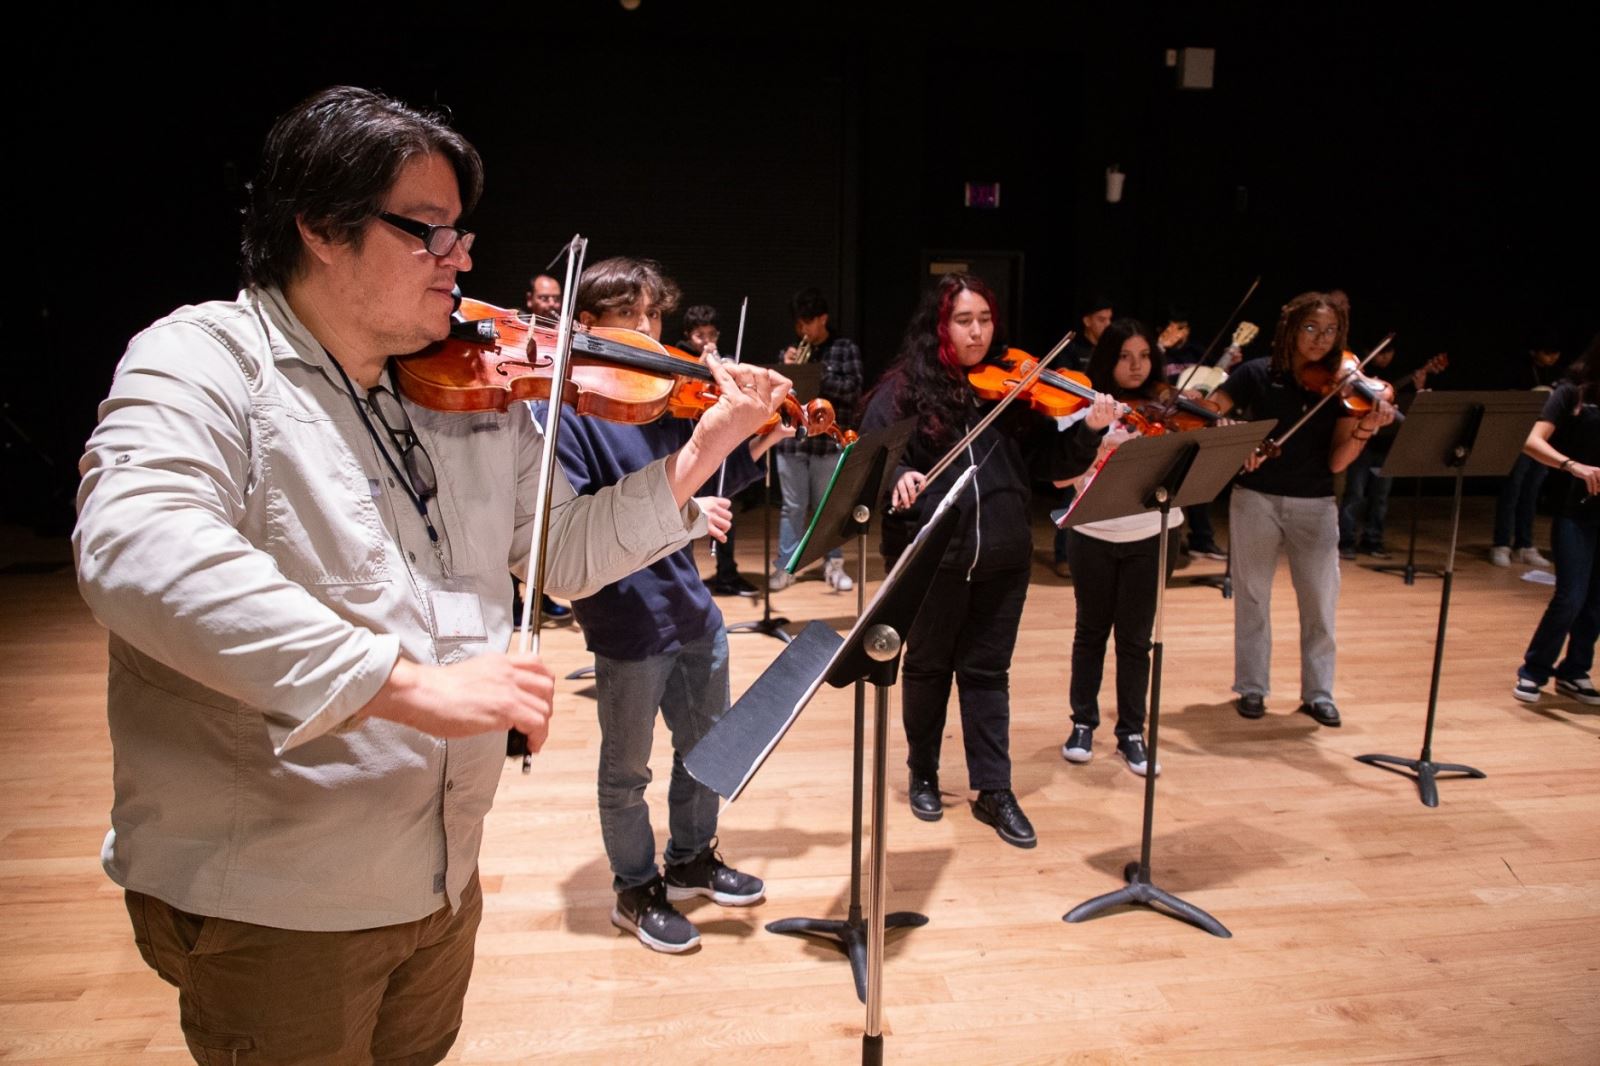 A teacher leads mariachi students on the violin